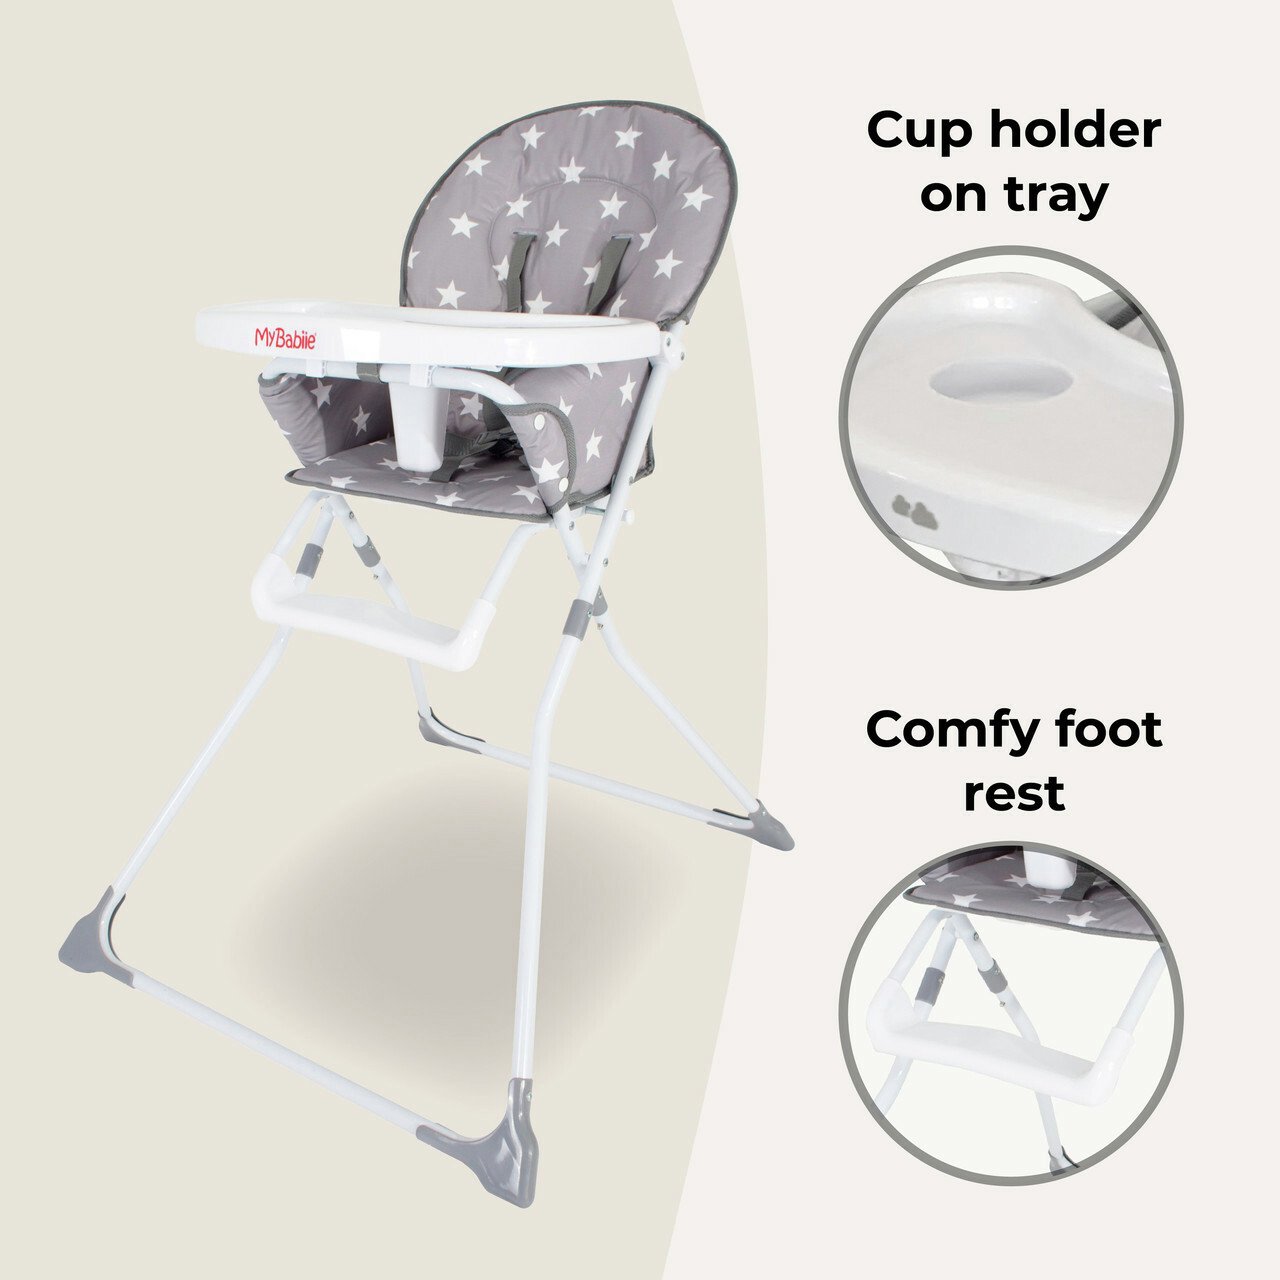 My Babiie Grey Star Compact Highchair Review